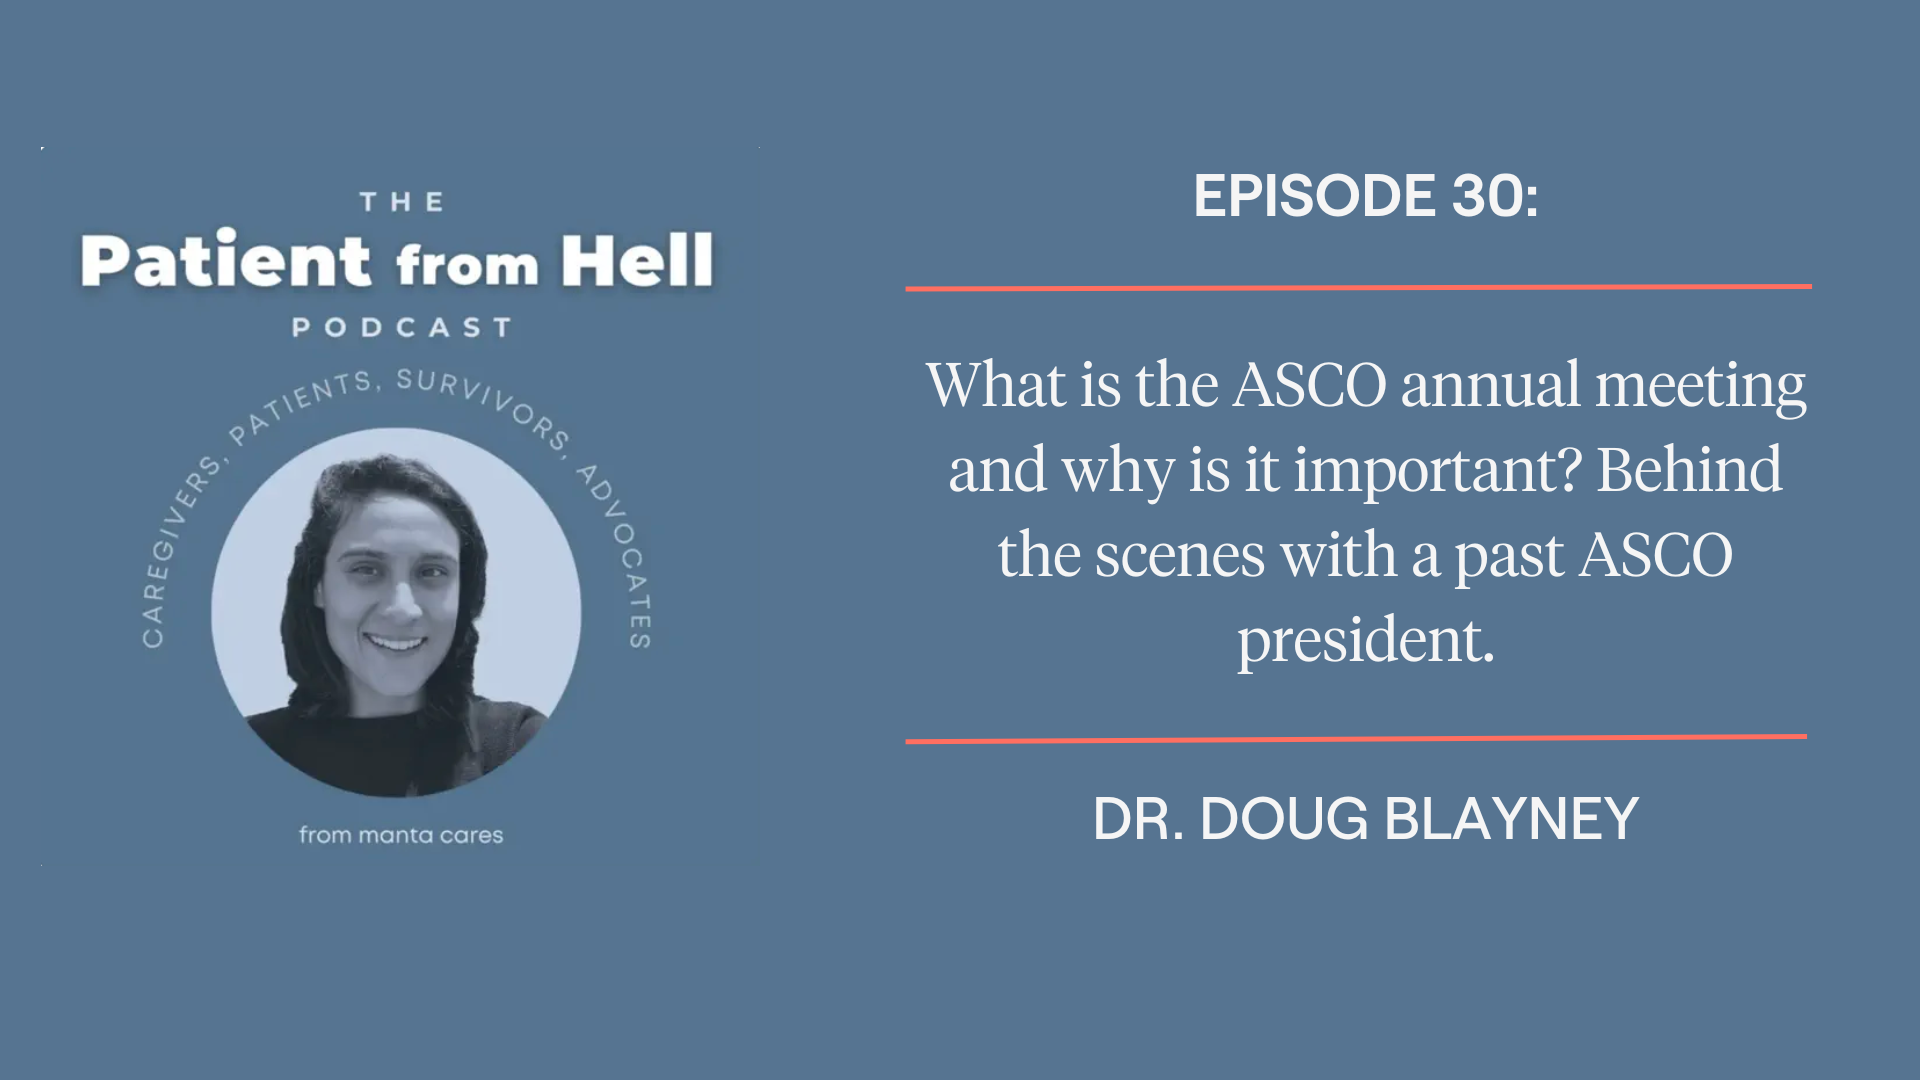 Load video: What is the ASCO annual meeting and why is it important to patients and health care providers?